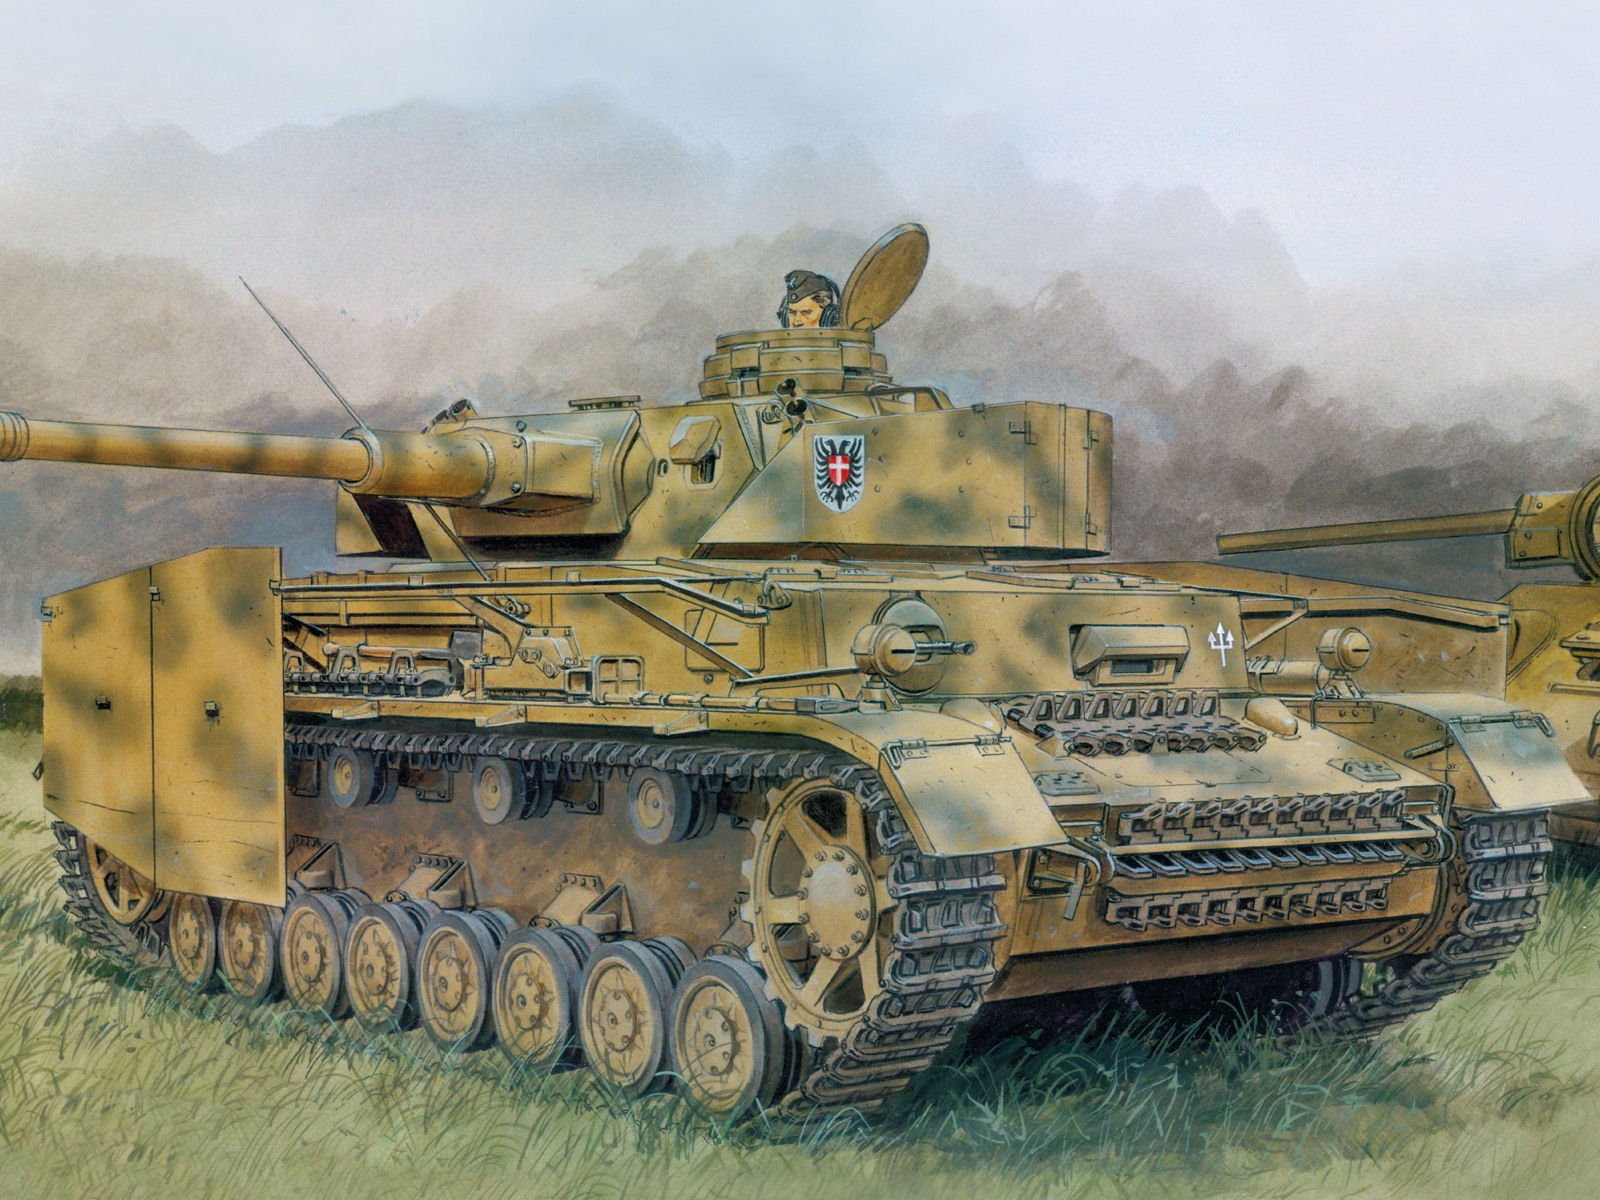 Military tanks, armored HD painting wallpapers #14 - 1600x1200